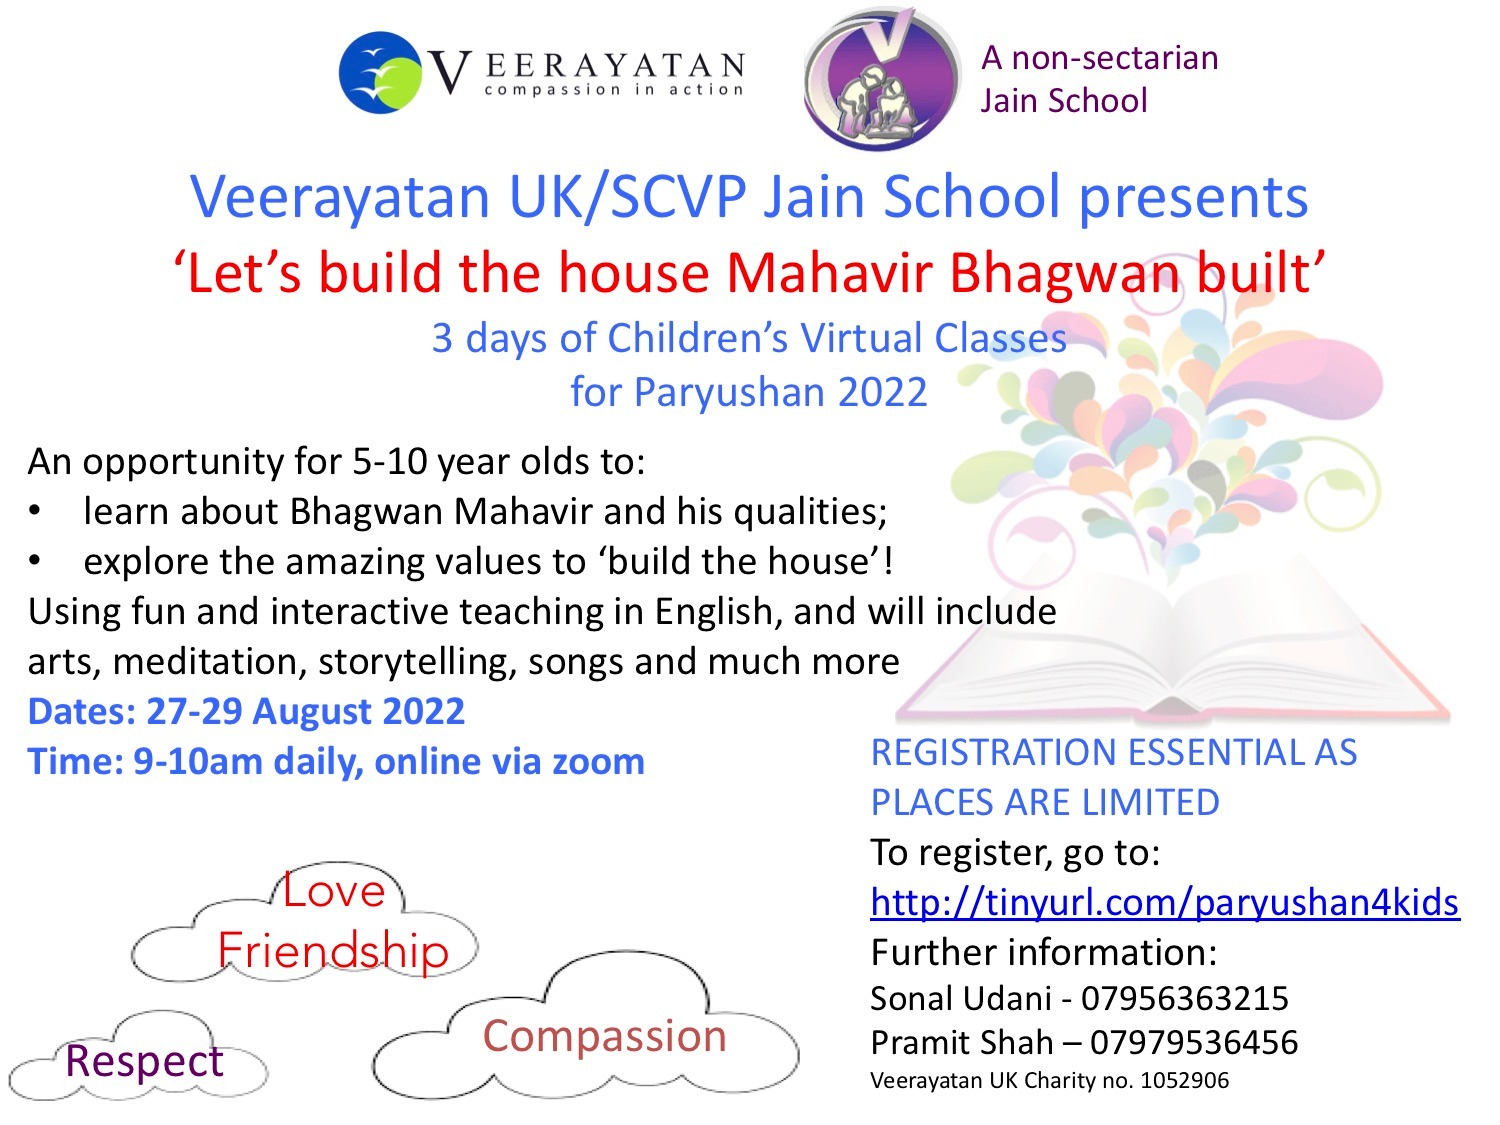 Paryushan for Kids: 27 August to 29 August